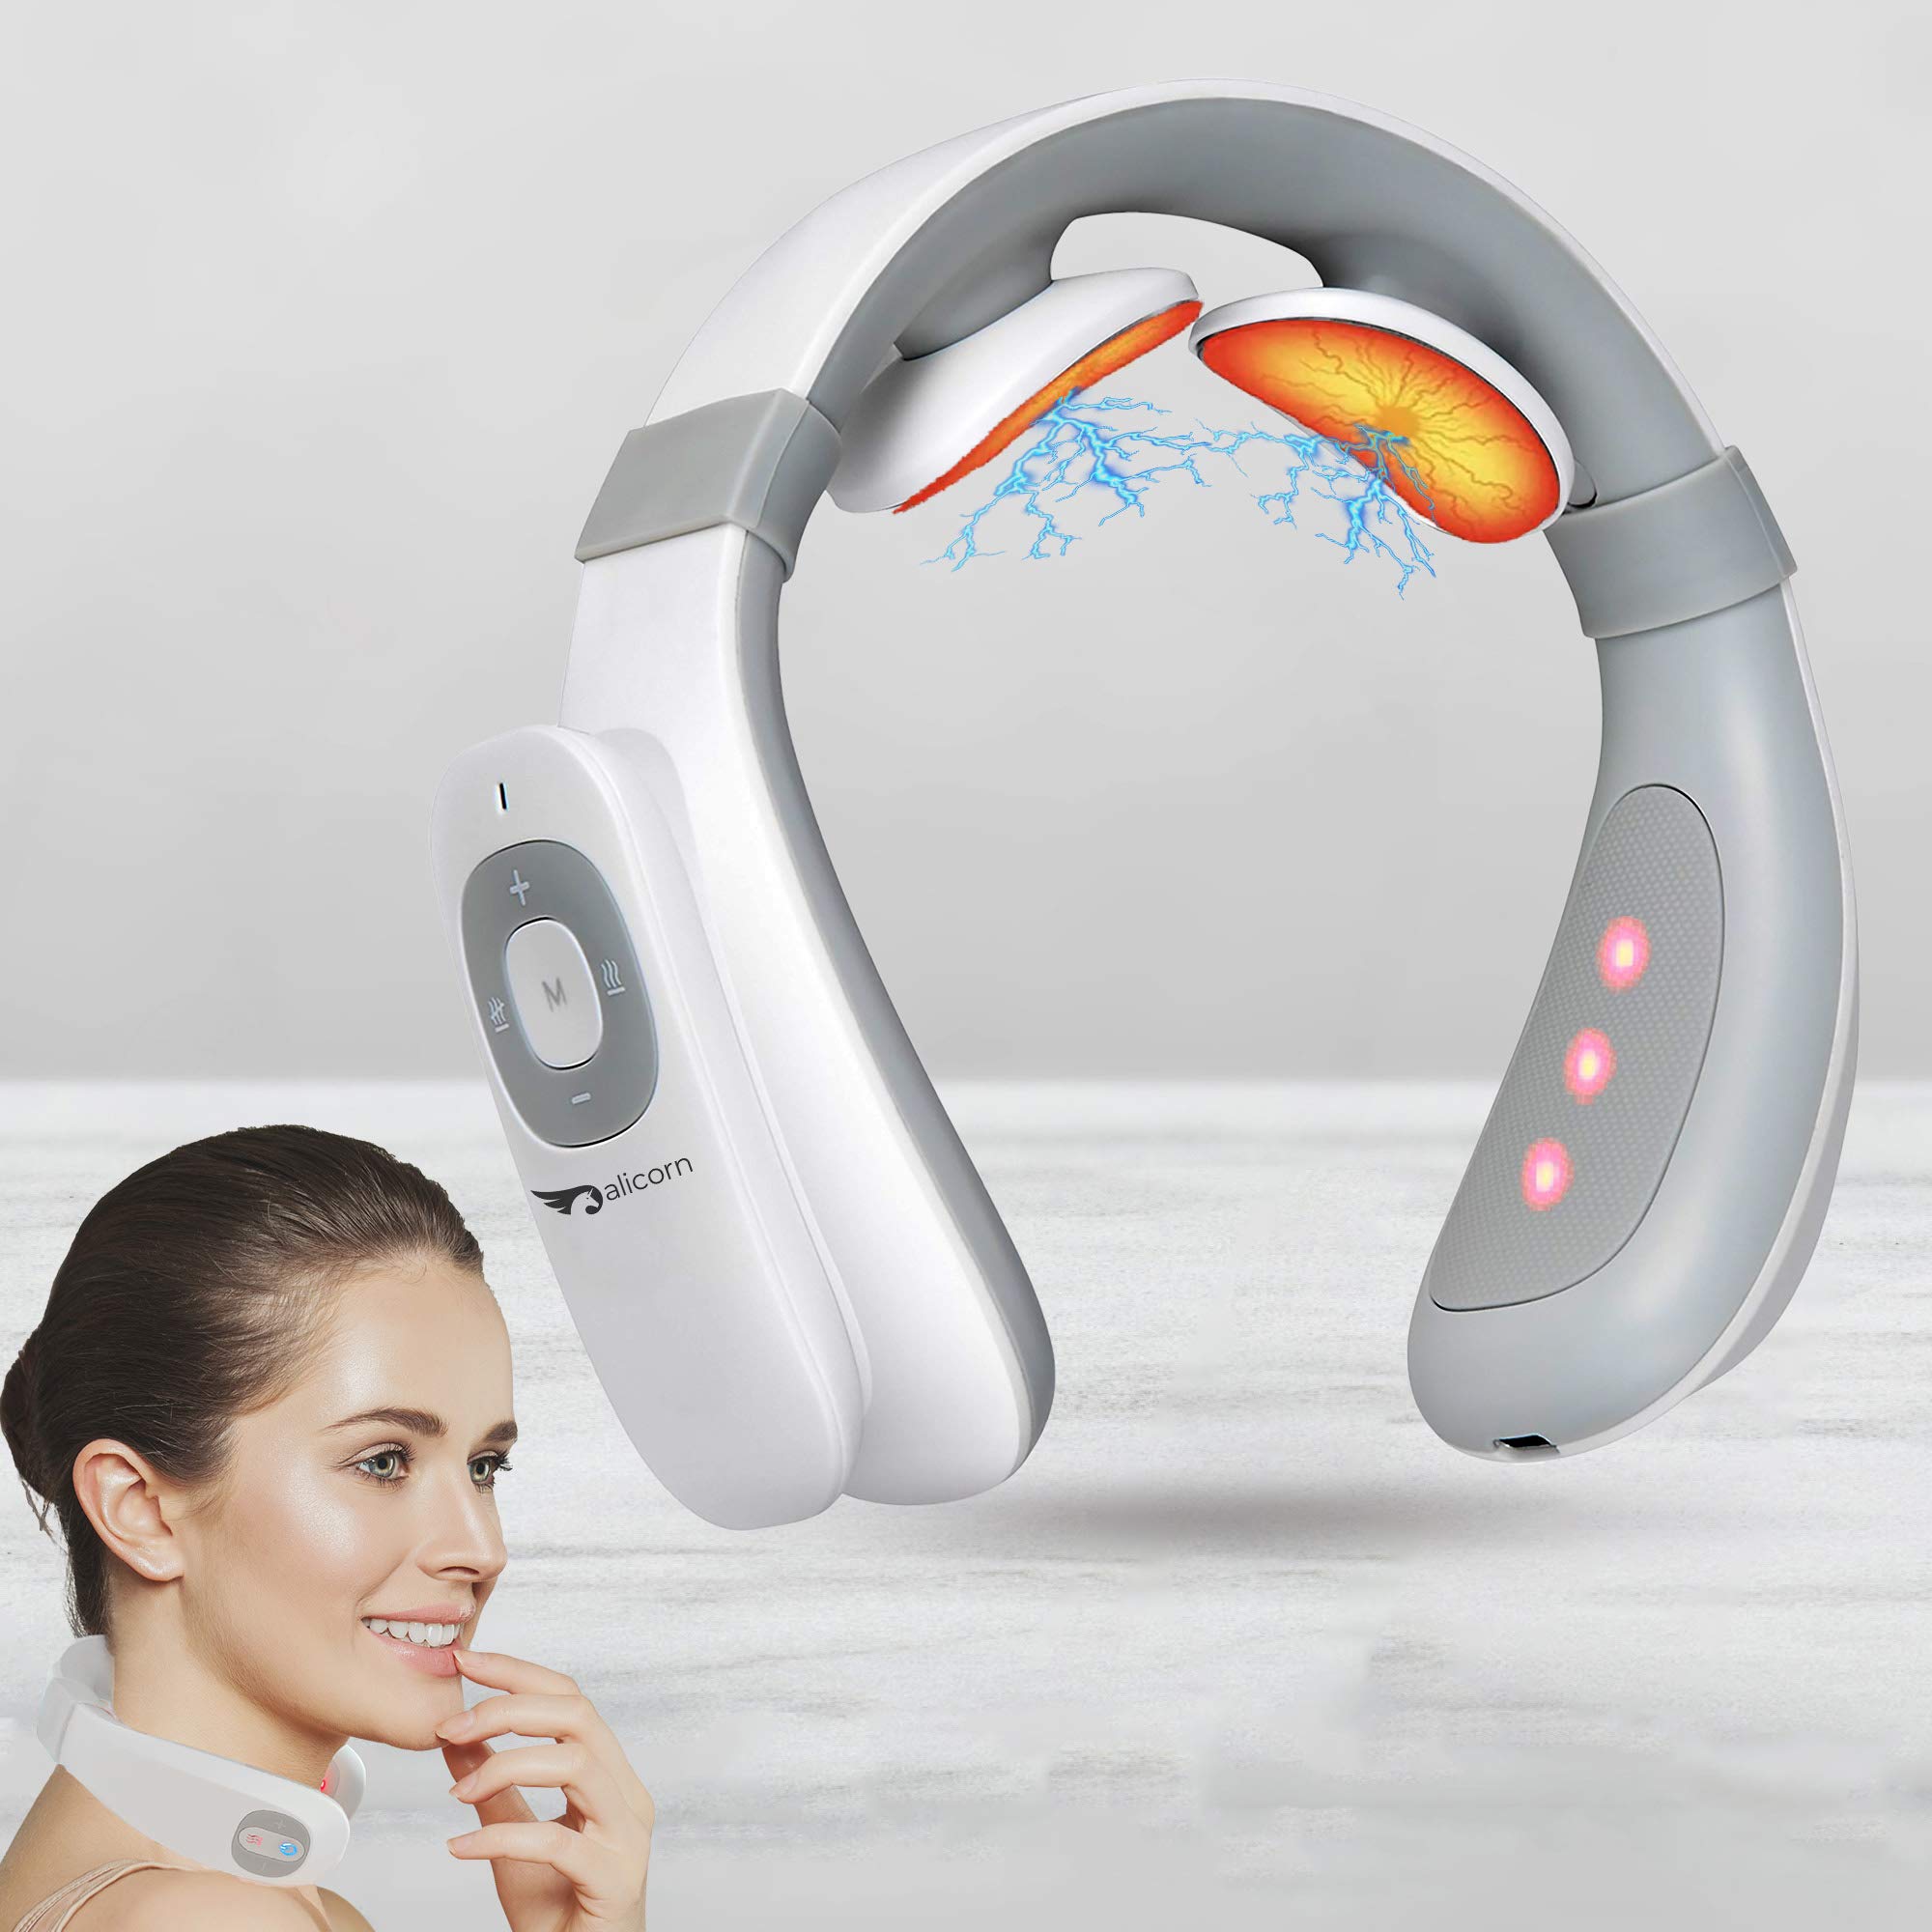 Alicorn Pulse TENS Unit Neck Relax Relaxer Muscle Stimulation with Heat  Intelligent Smart Massager (White) Portable